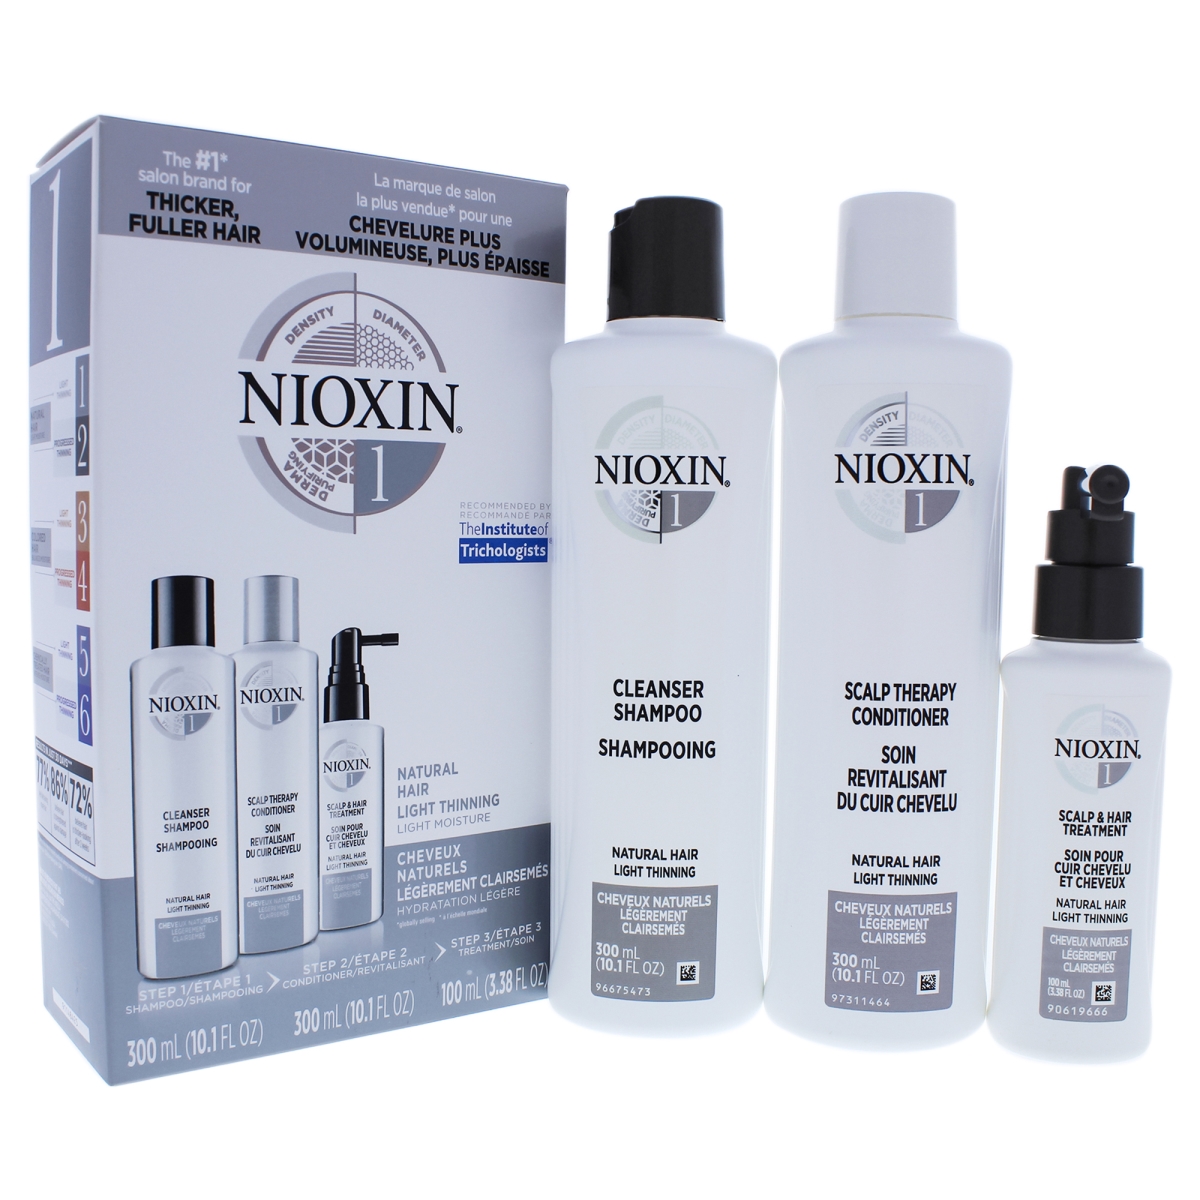 I0084096 System 1 Natural Hair Light Thinning Kit - 3 Piece